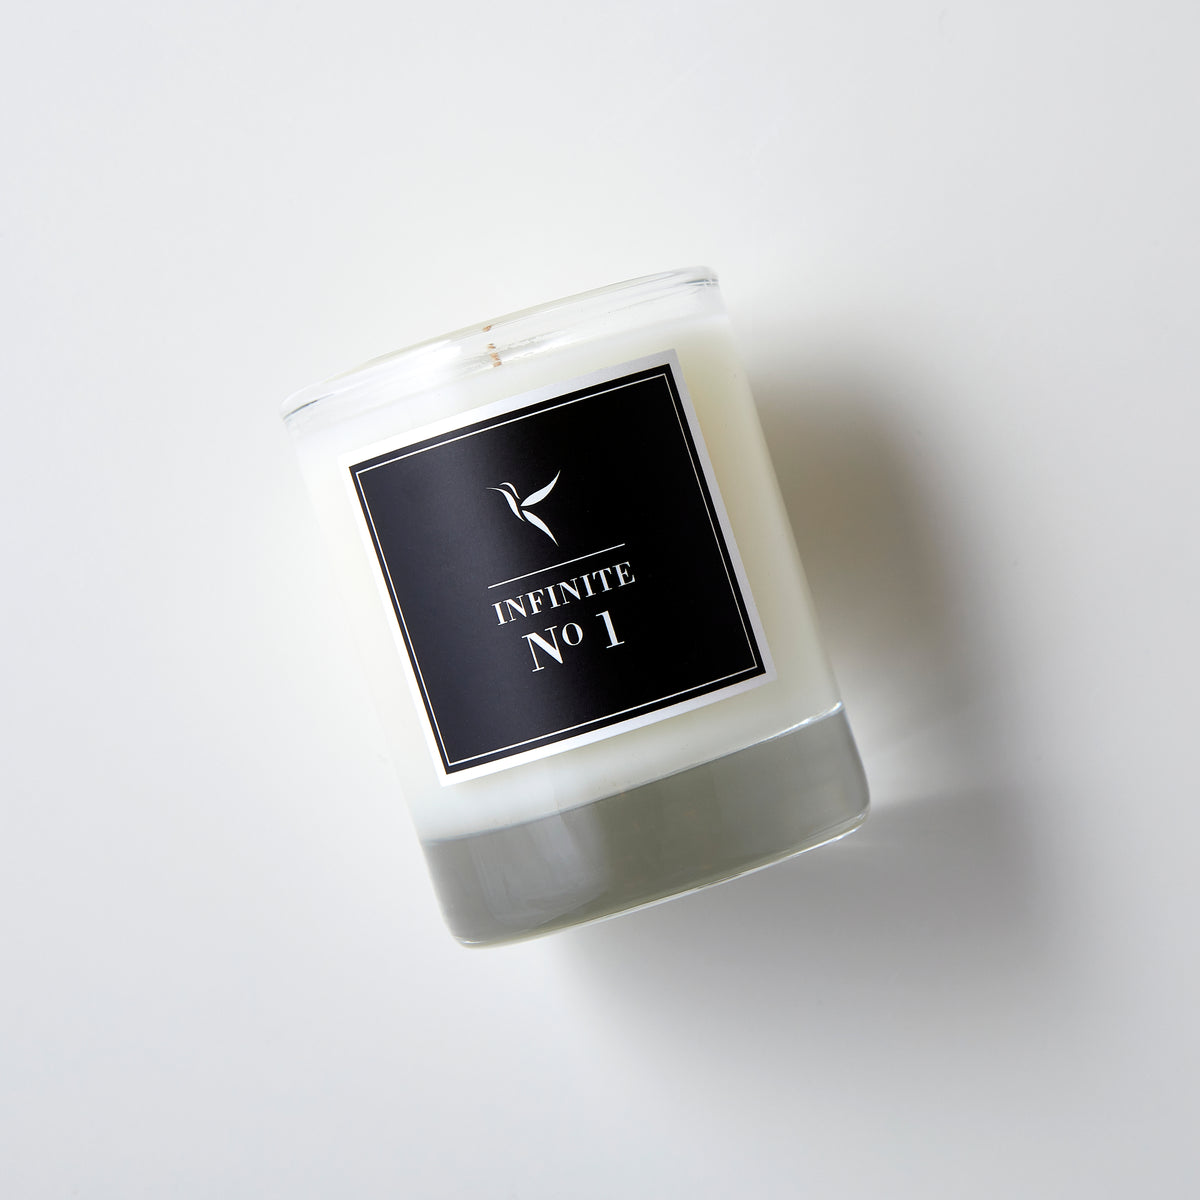 Infinite No 1 Travel Candle